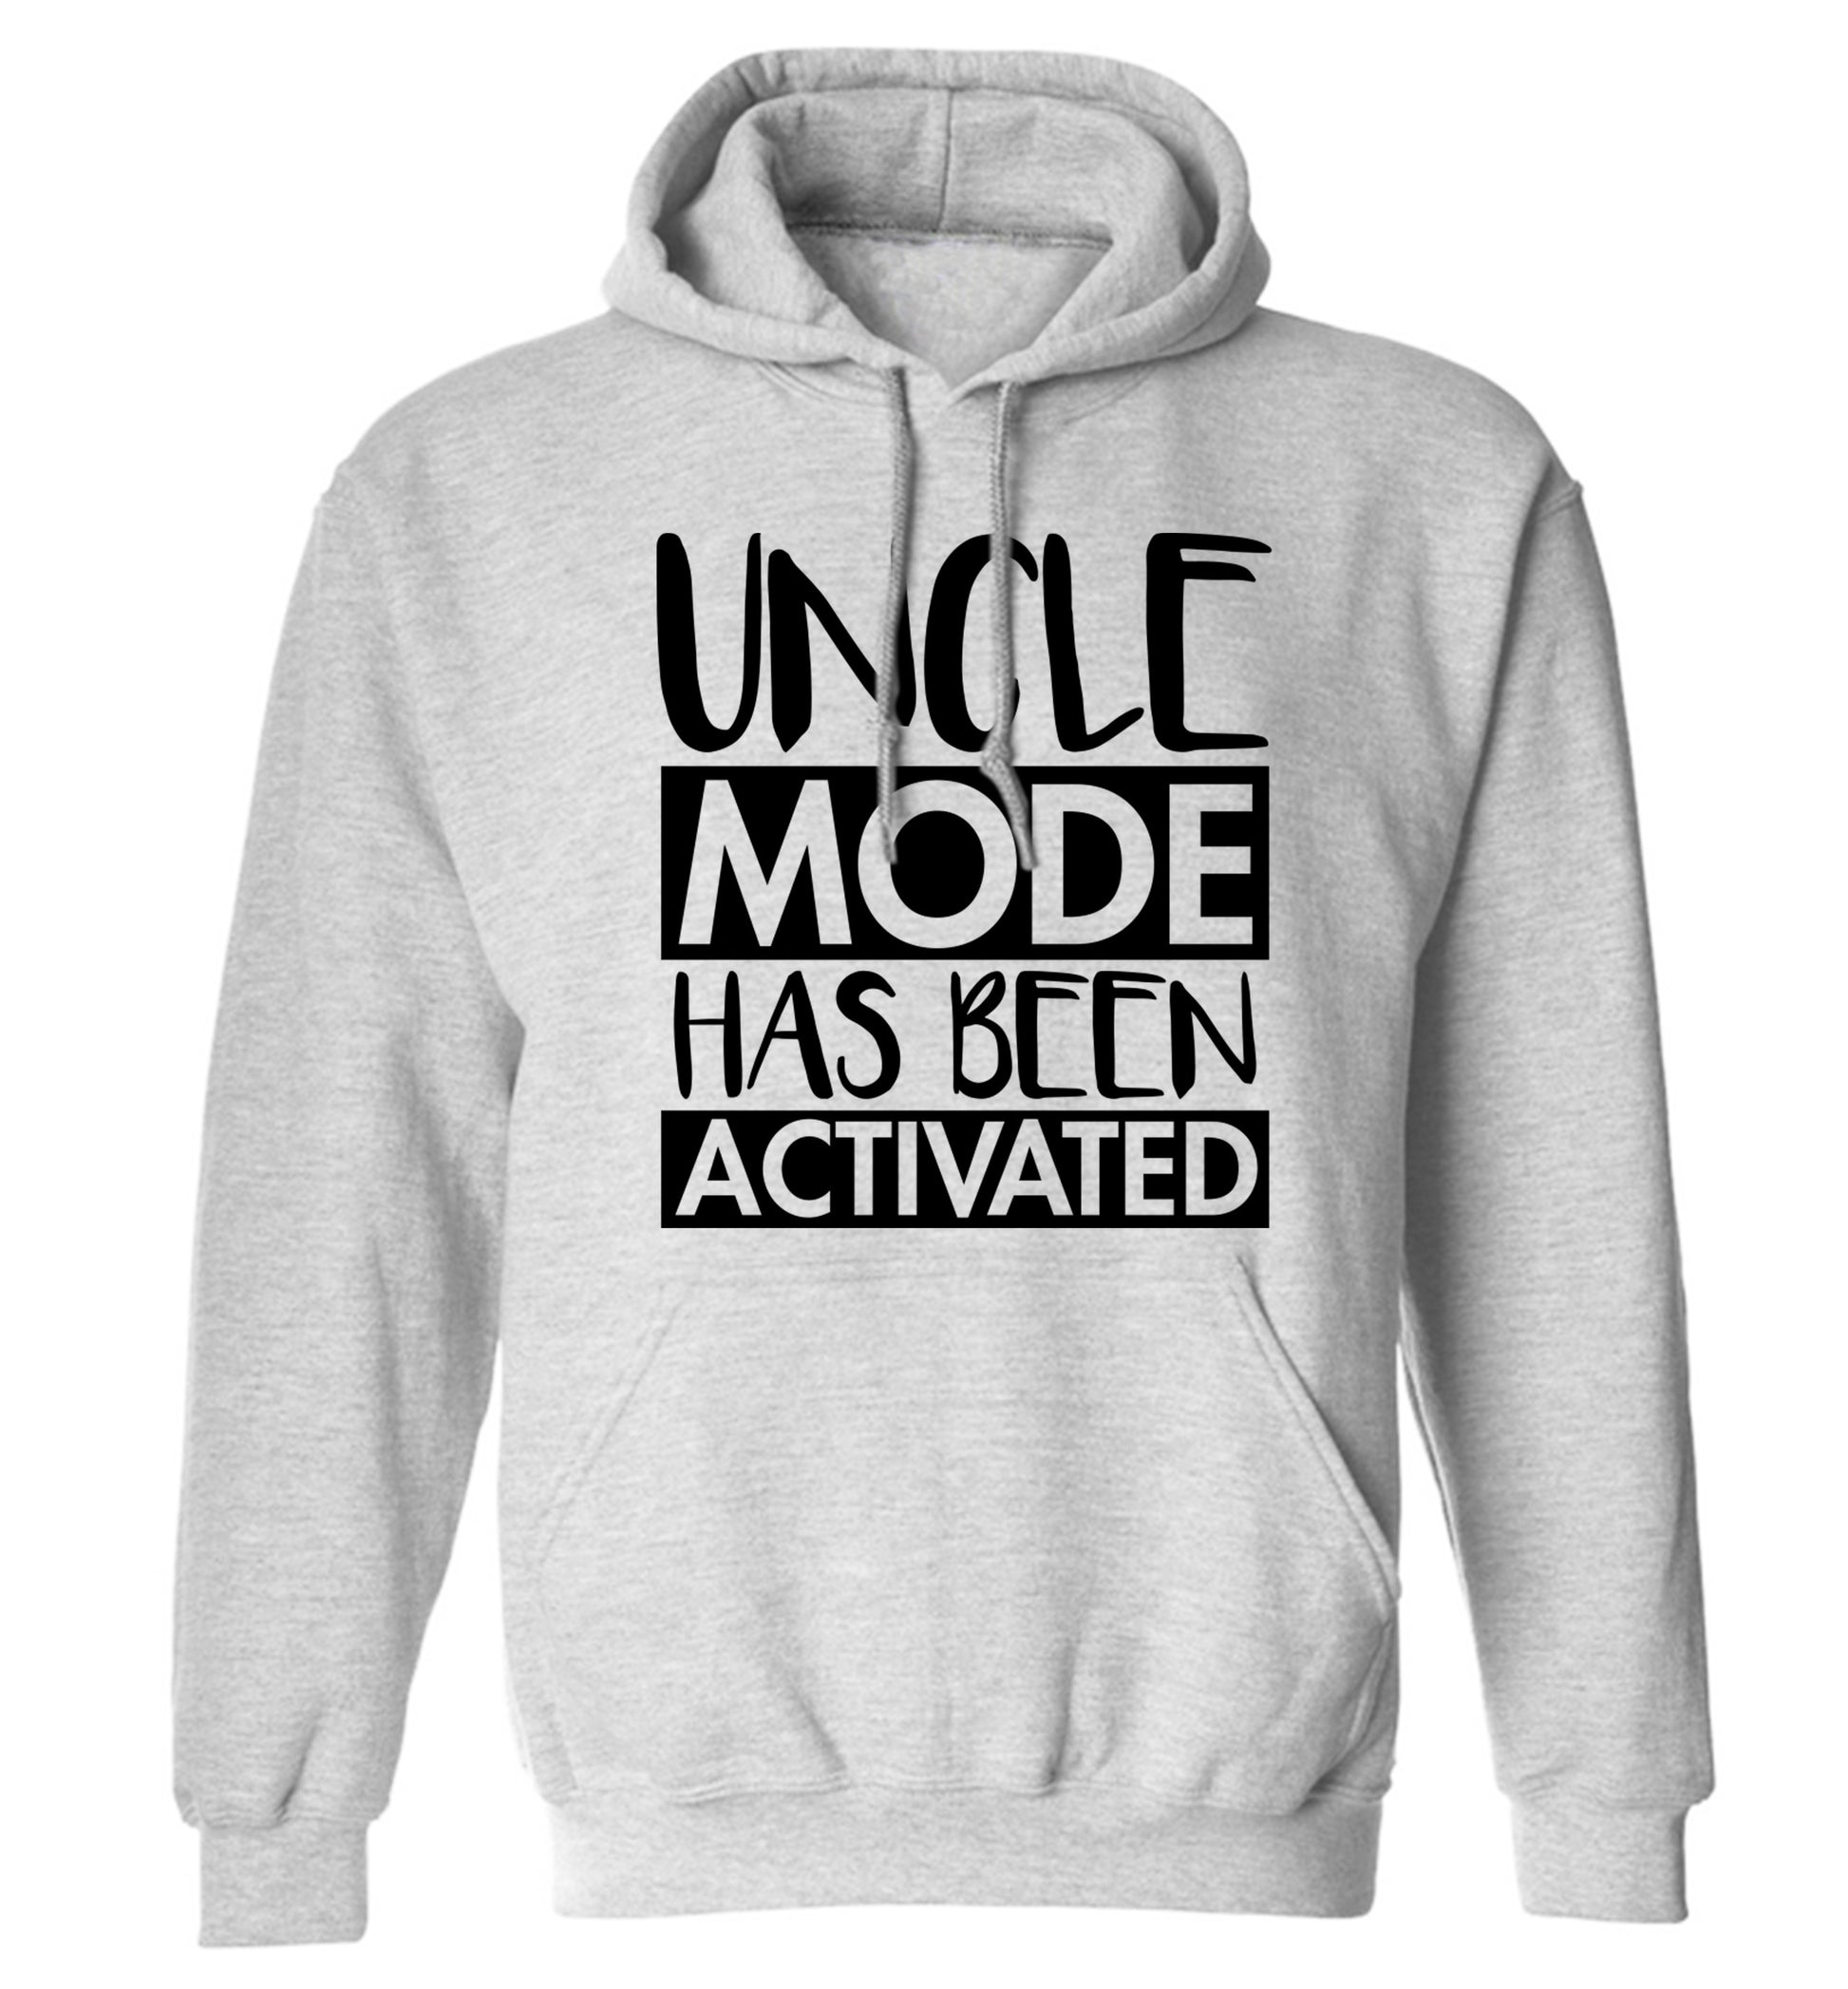 Uncle mode activated adults unisex grey hoodie 2XL